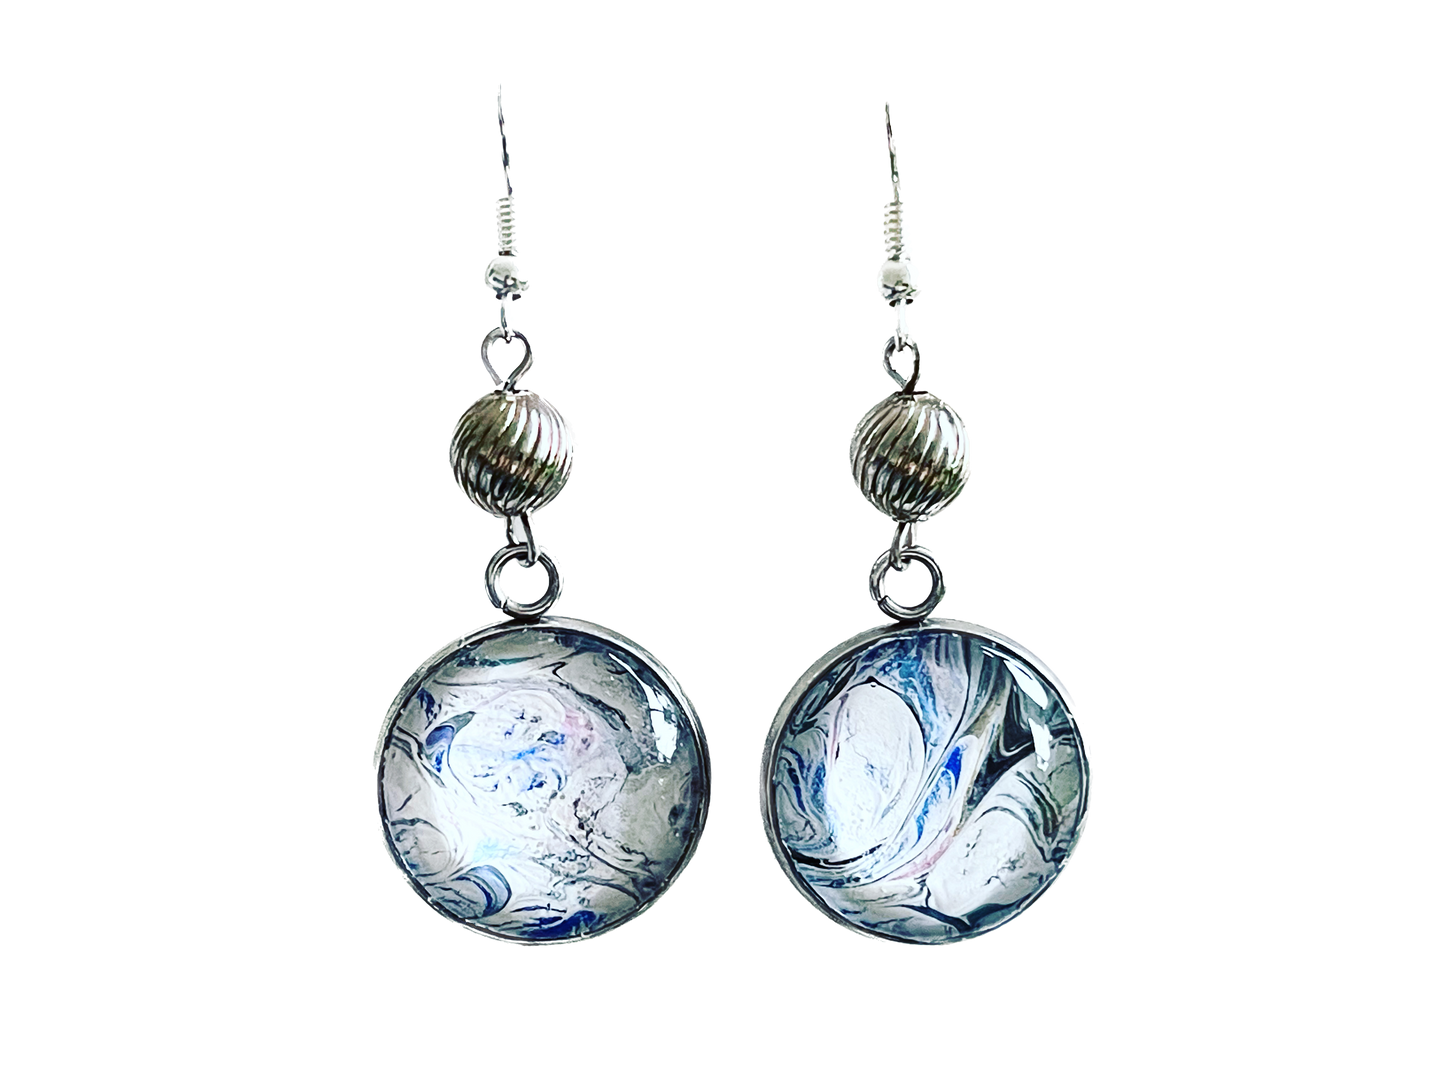 White and Blue Multicolored Fluid Art Earrings